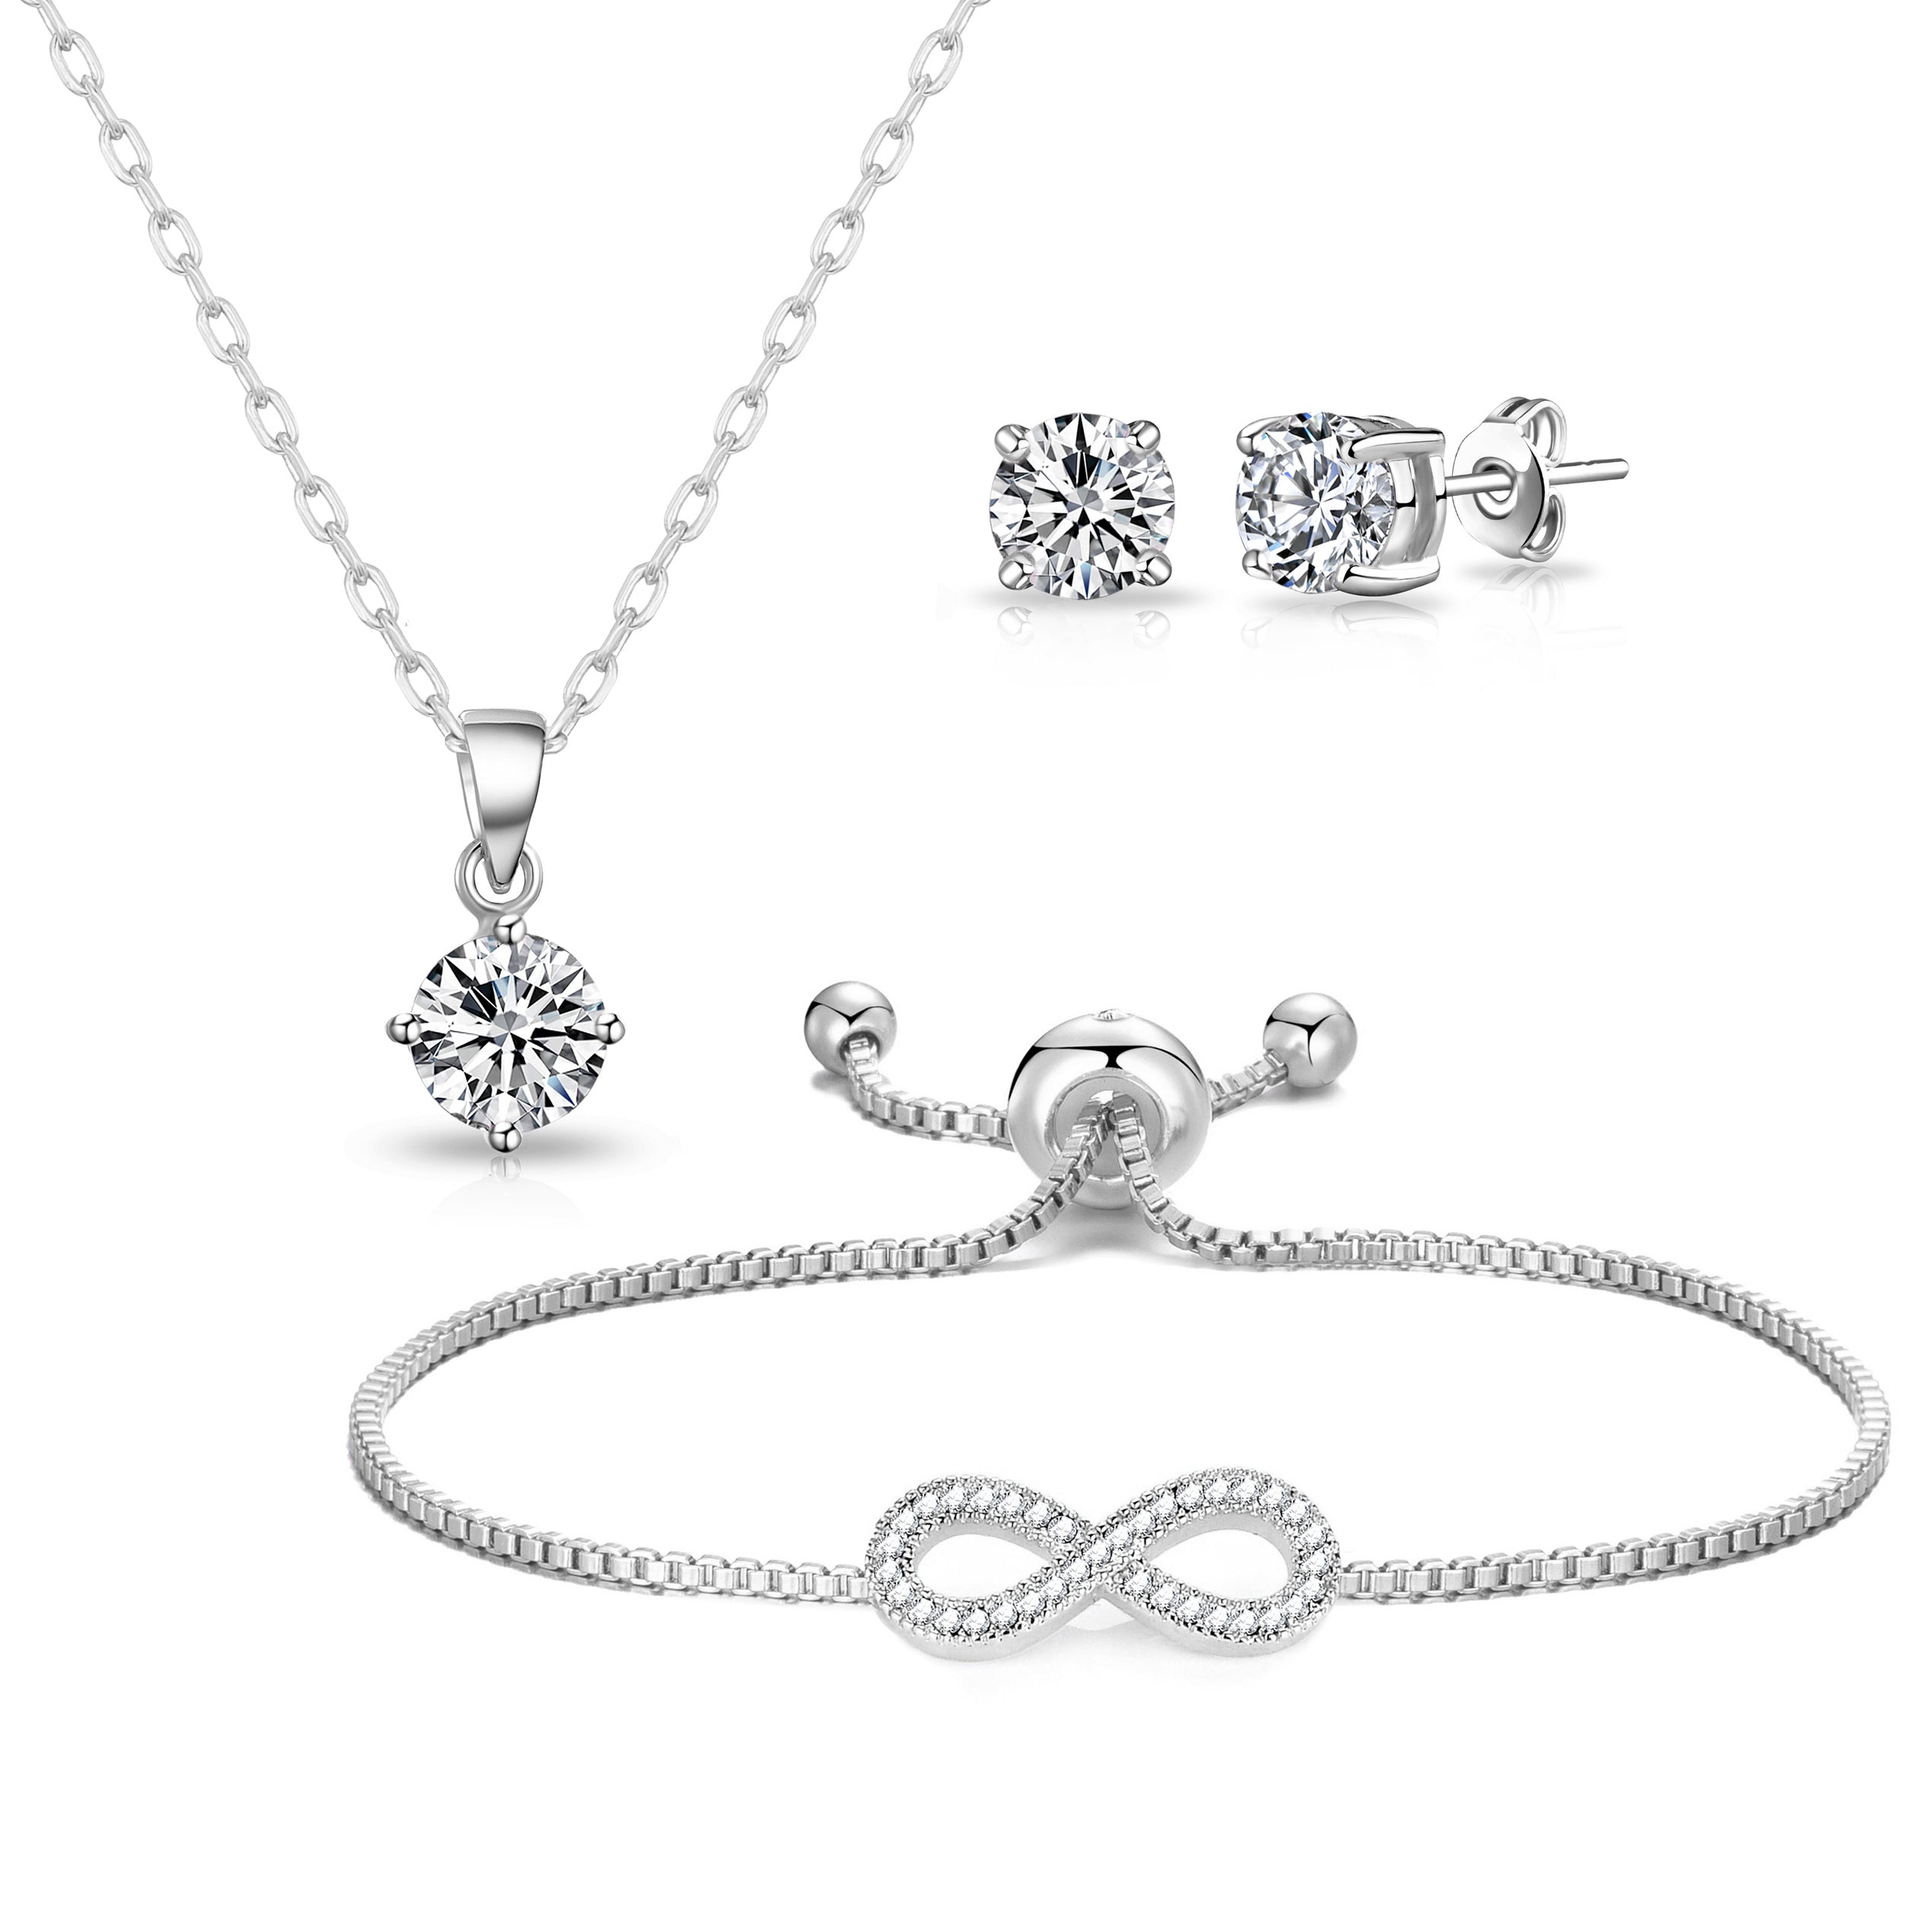 Silver Plated Infinity Friendship Set Created with Zircondia® Crystals by Philip Jones Jewellery